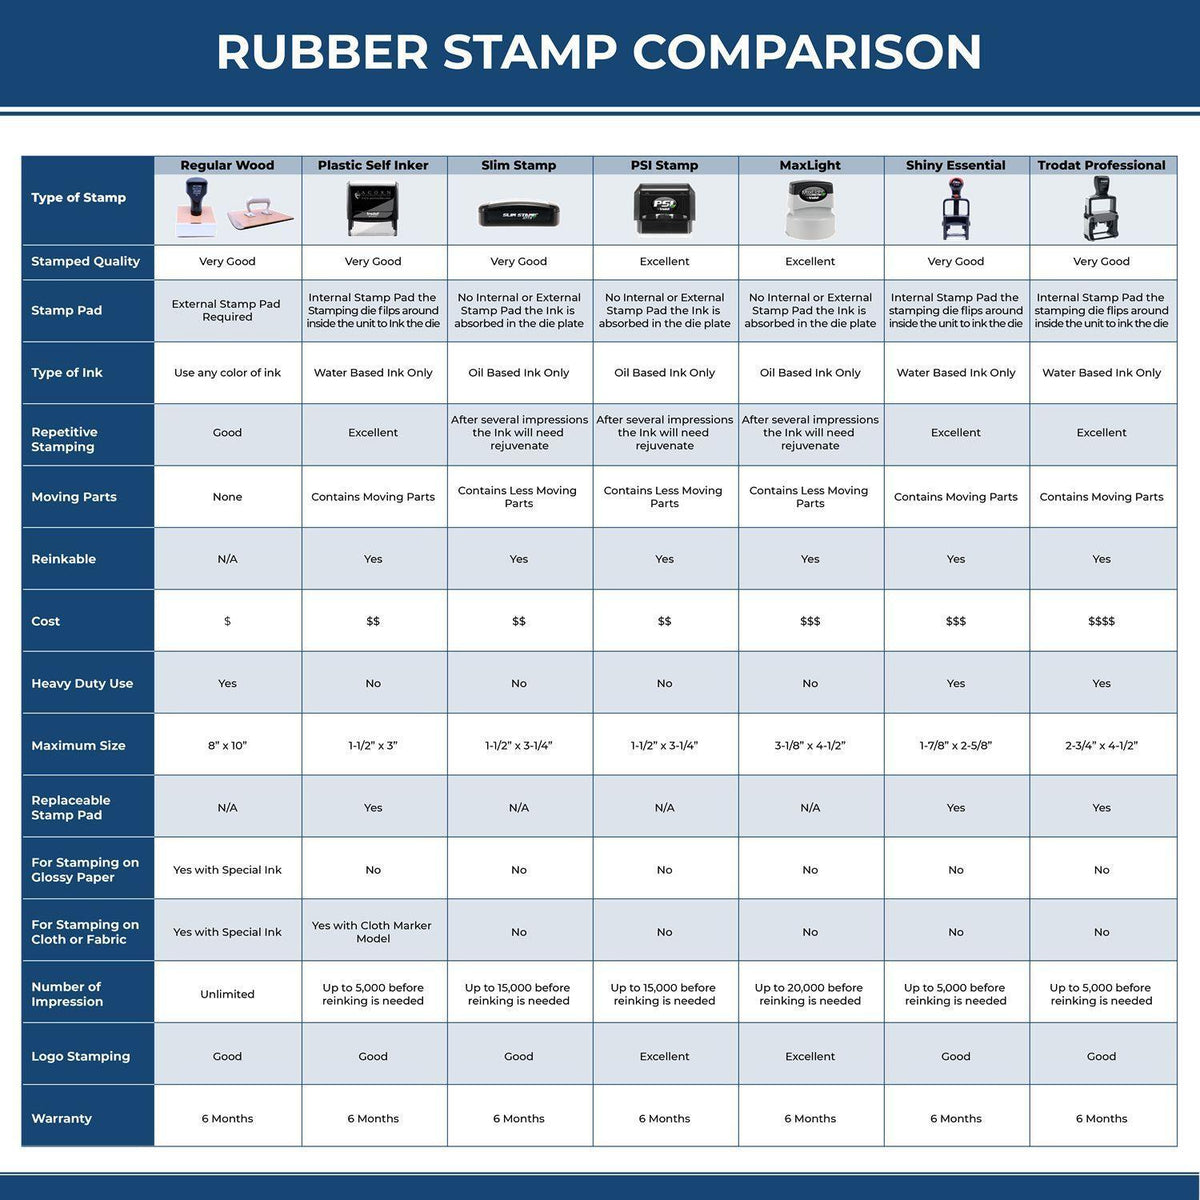 Large Check Your Work Rubber Stamp 5626R Rubber Stamp Comparison